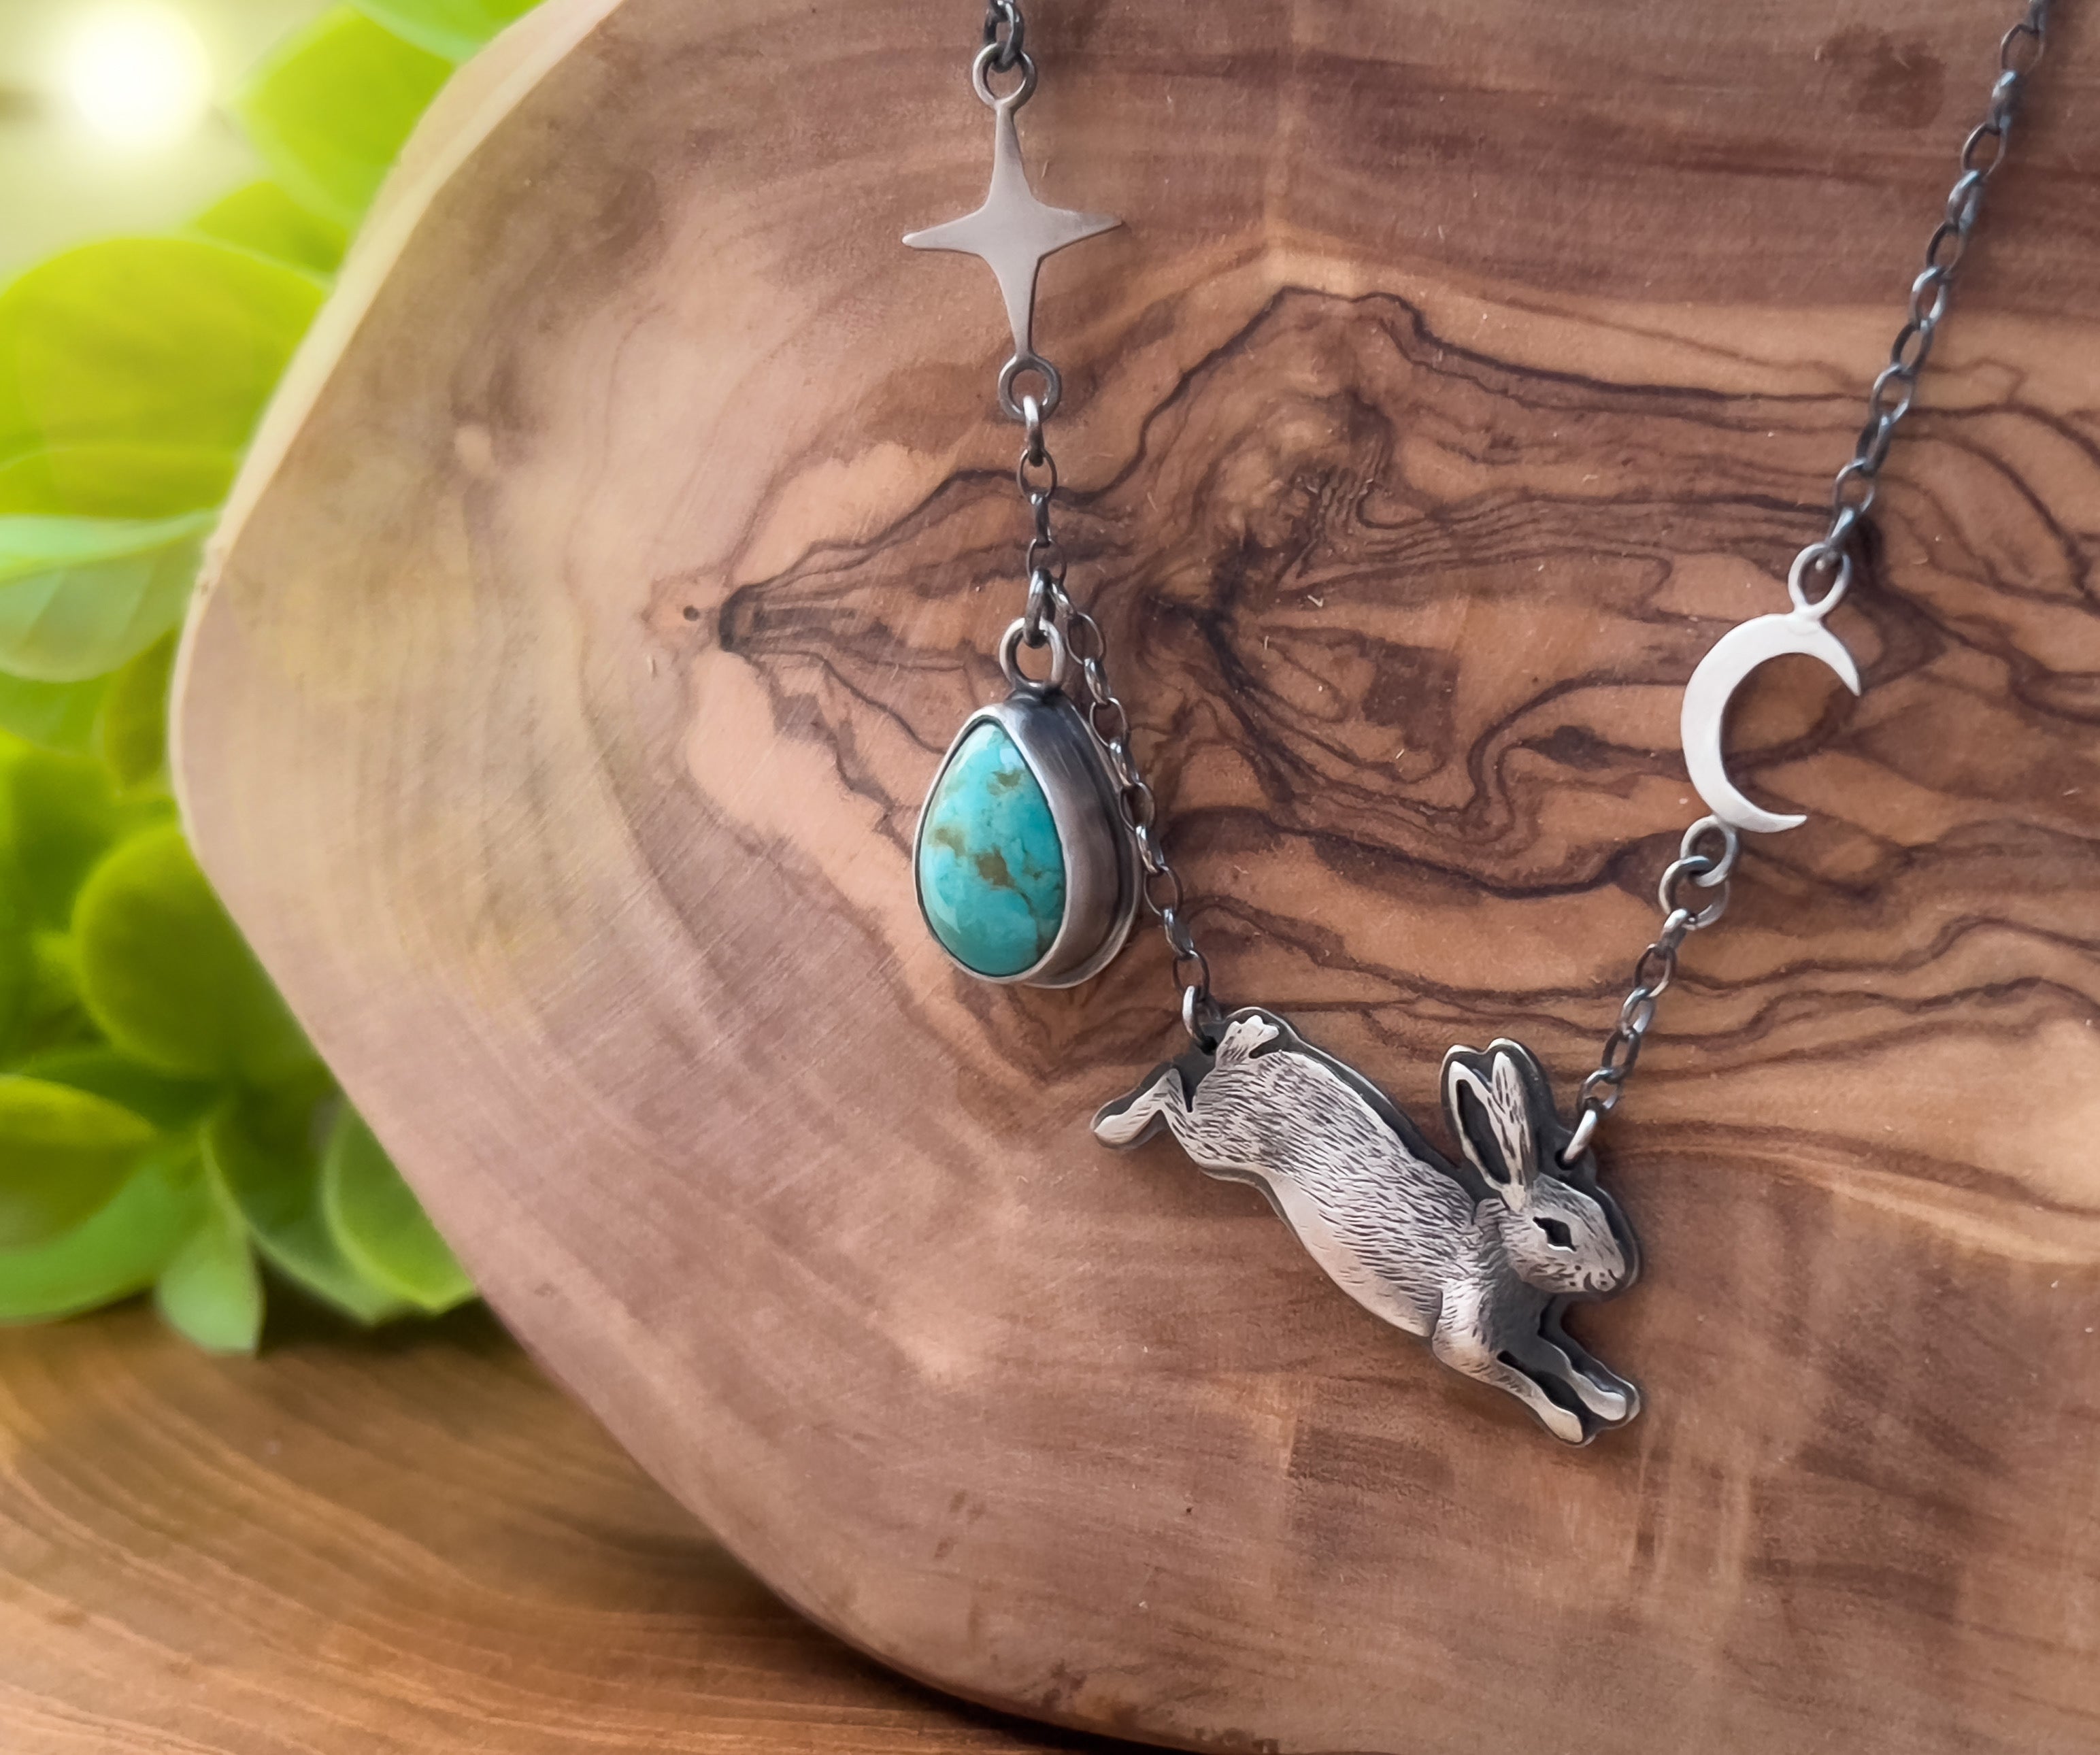 The Rabbit & Turquoise Necklace